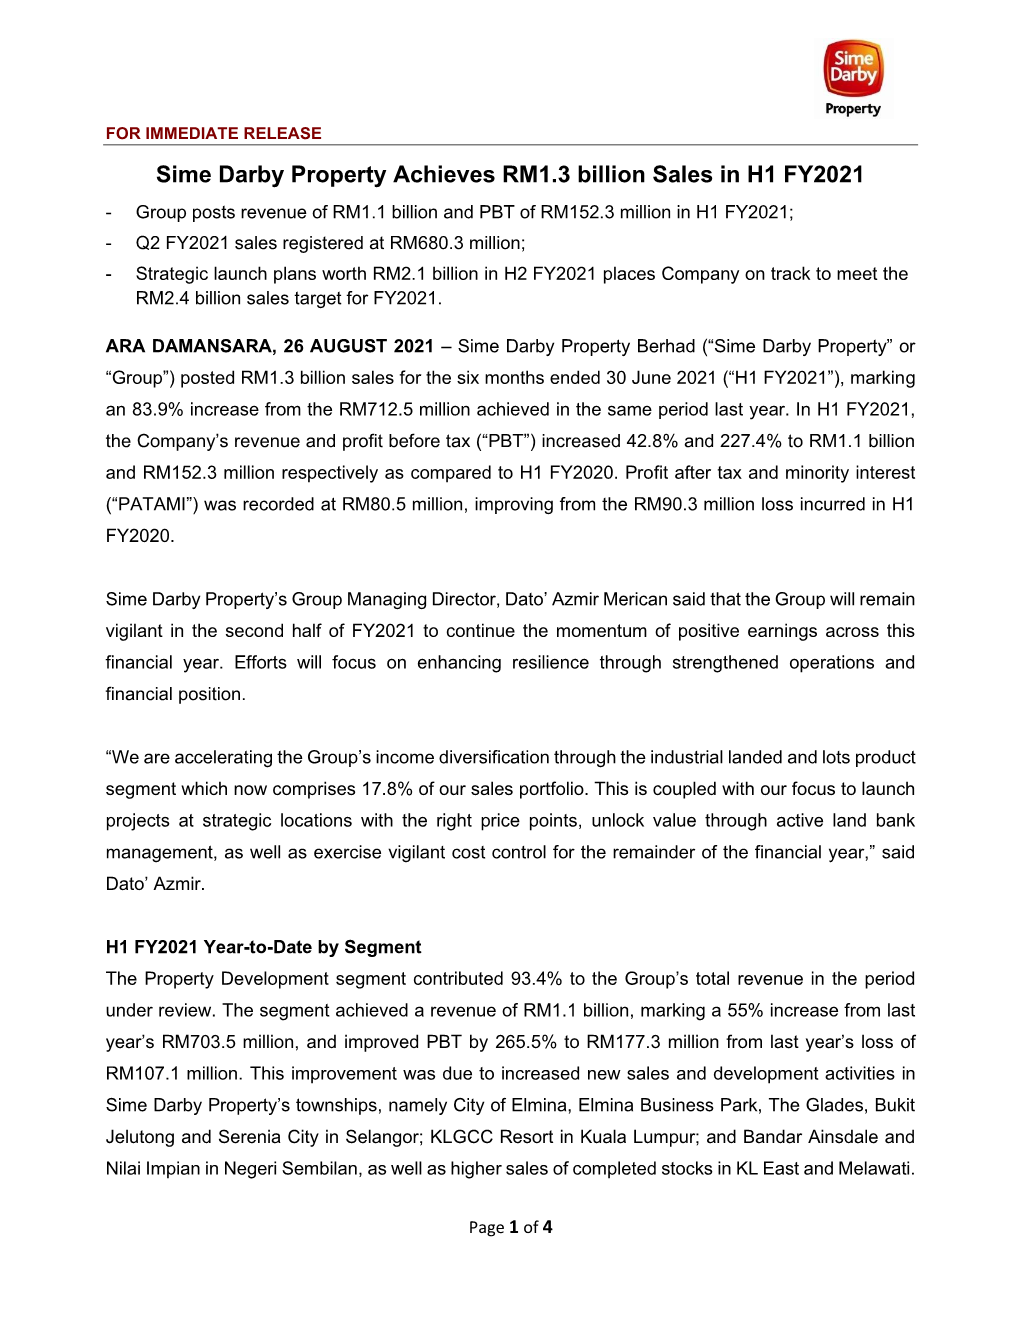 Sime Darby Property Achieves RM1.3 Billion Sales in H1 FY2021